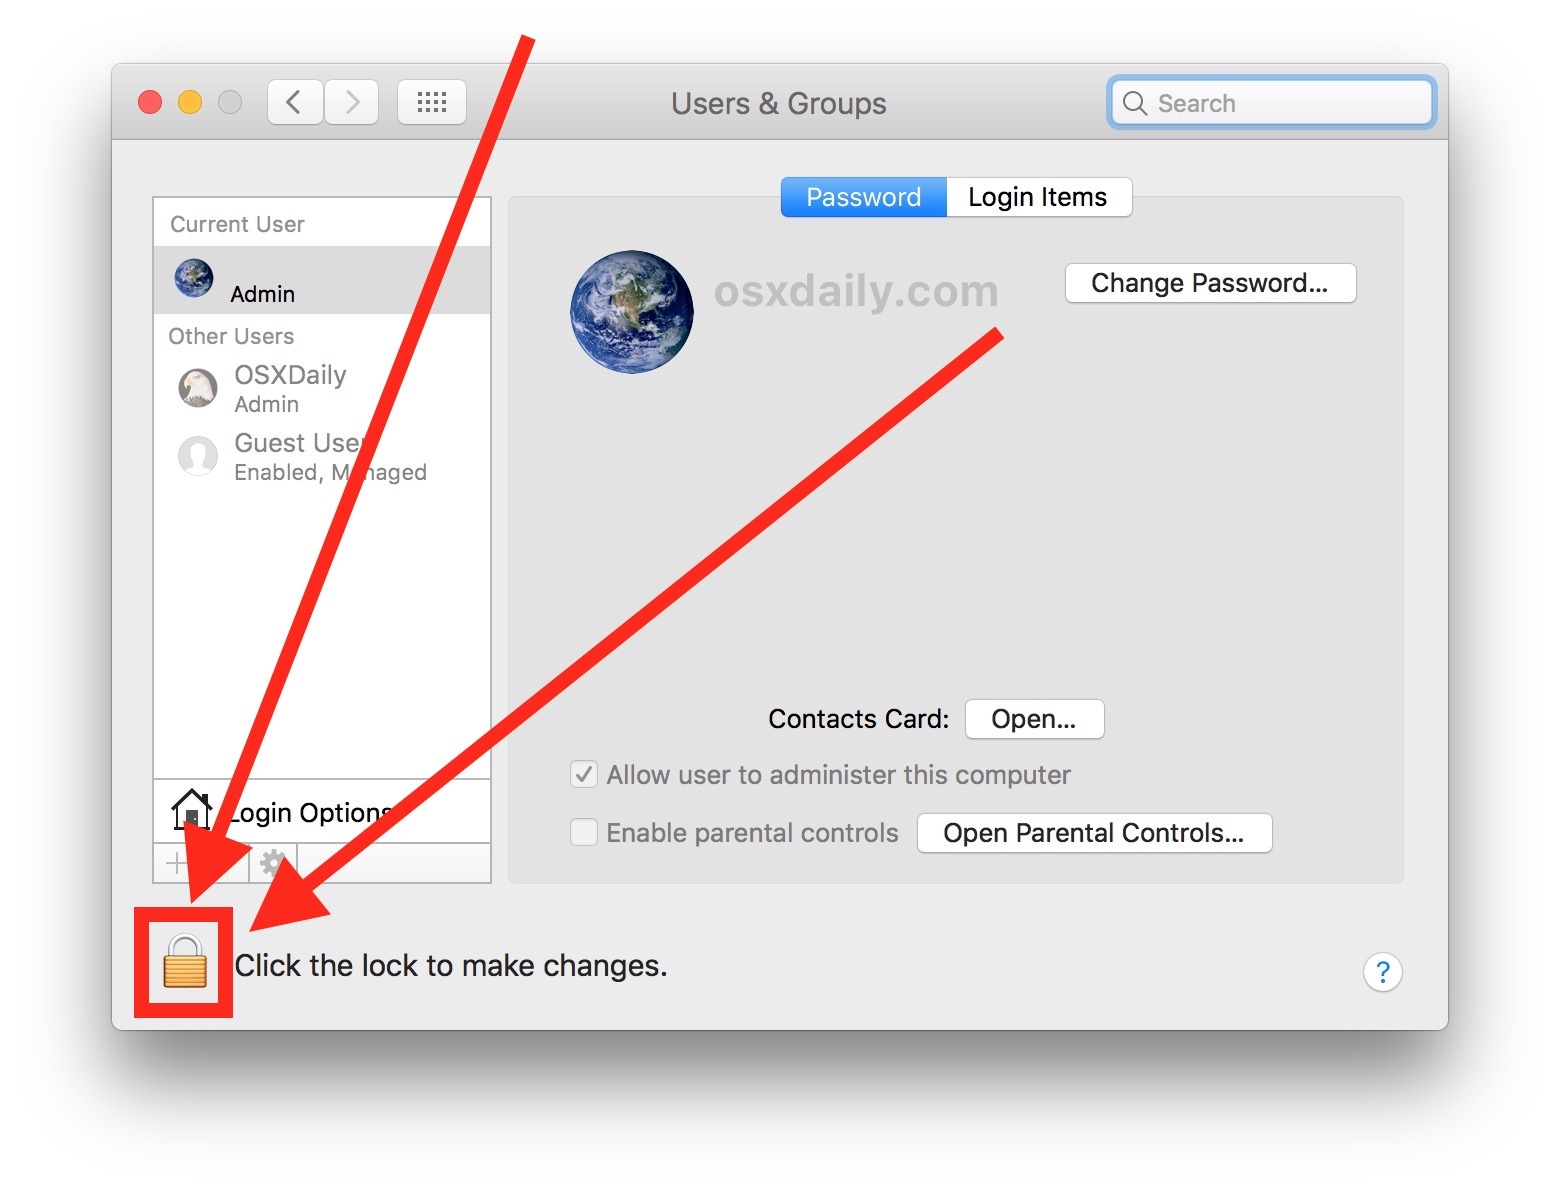 Creating a new admin user account on the Mac